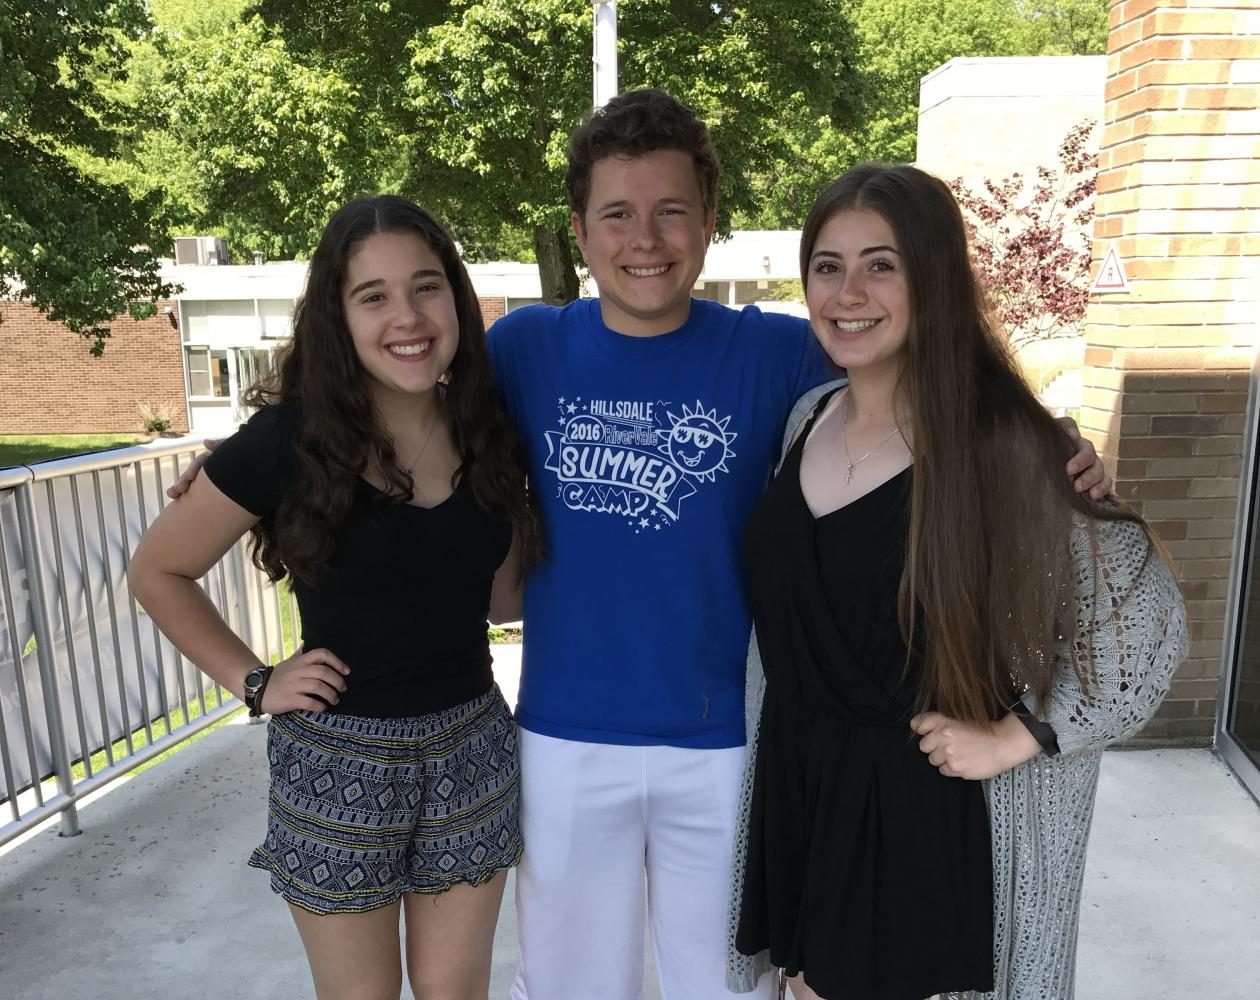 Pictured above (from left): Lauren Cohen, Kyle Comito, and Madison Gallo. The Smoke Signal will transition from Comito as Editor in Chief to Cohen and Gallo both at the helm for the 2017-2018 school year.